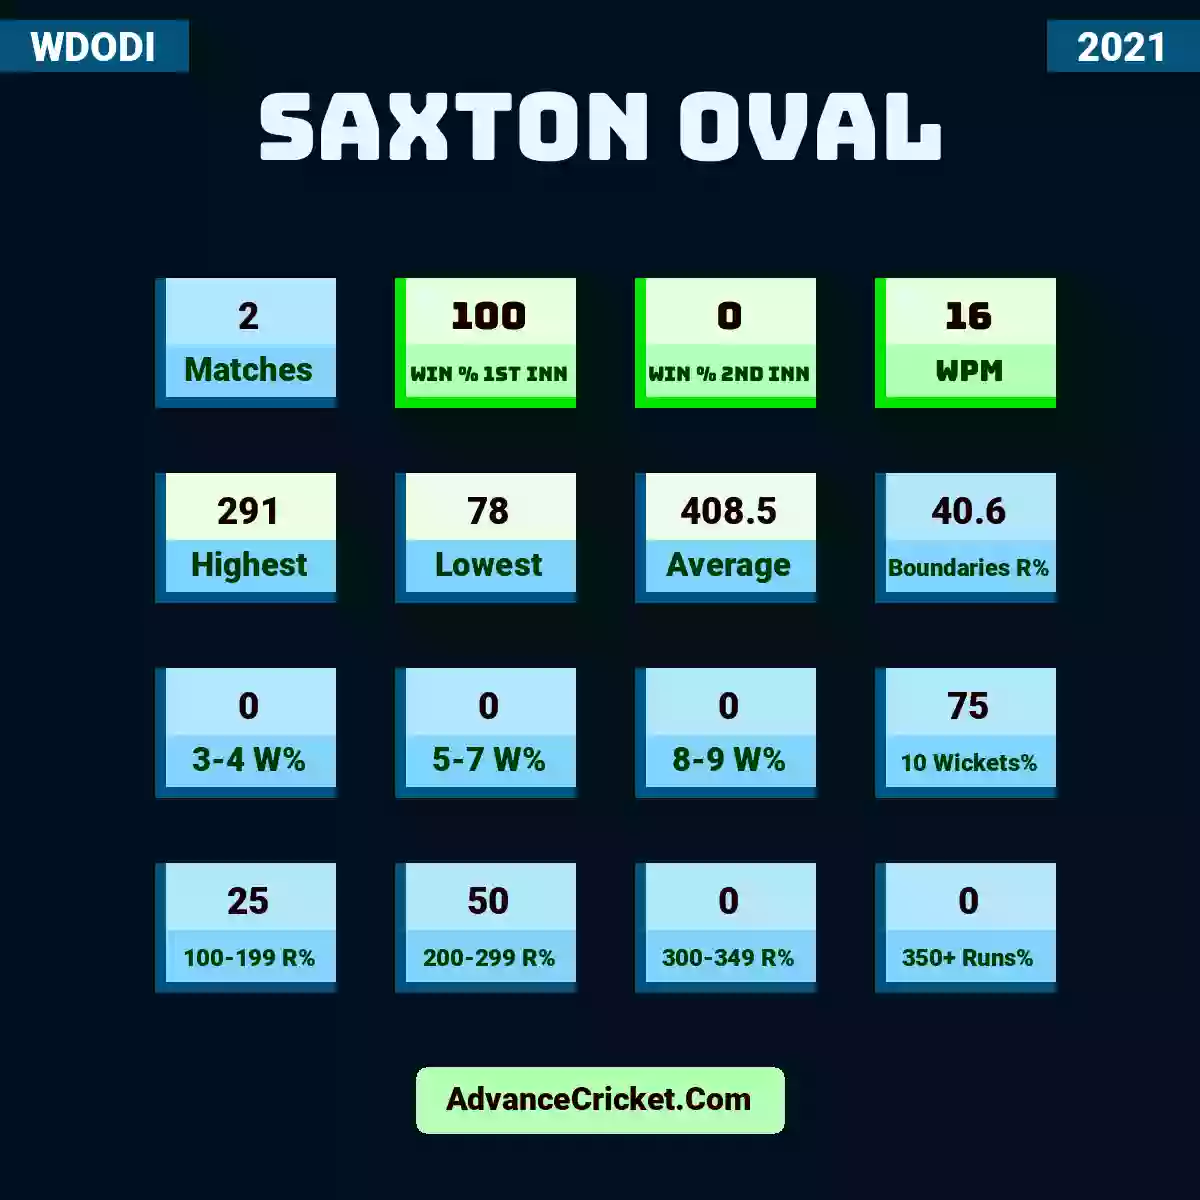 Image showing Saxton Oval with Matches: 2, Win % 1st Inn: 100, Win % 2nd Inn: 0, WPM: 16, Highest: 291, Lowest: 78, Average: 408.5, Boundaries R%: 40.6, 3-4 W%: 0, 5-7 W%: 0, 8-9 W%: 0, 10 Wickets%: 75, 100-199 R%: 25, 200-299 R%: 50, 300-349 R%: 0, 350+ Runs%: 0.